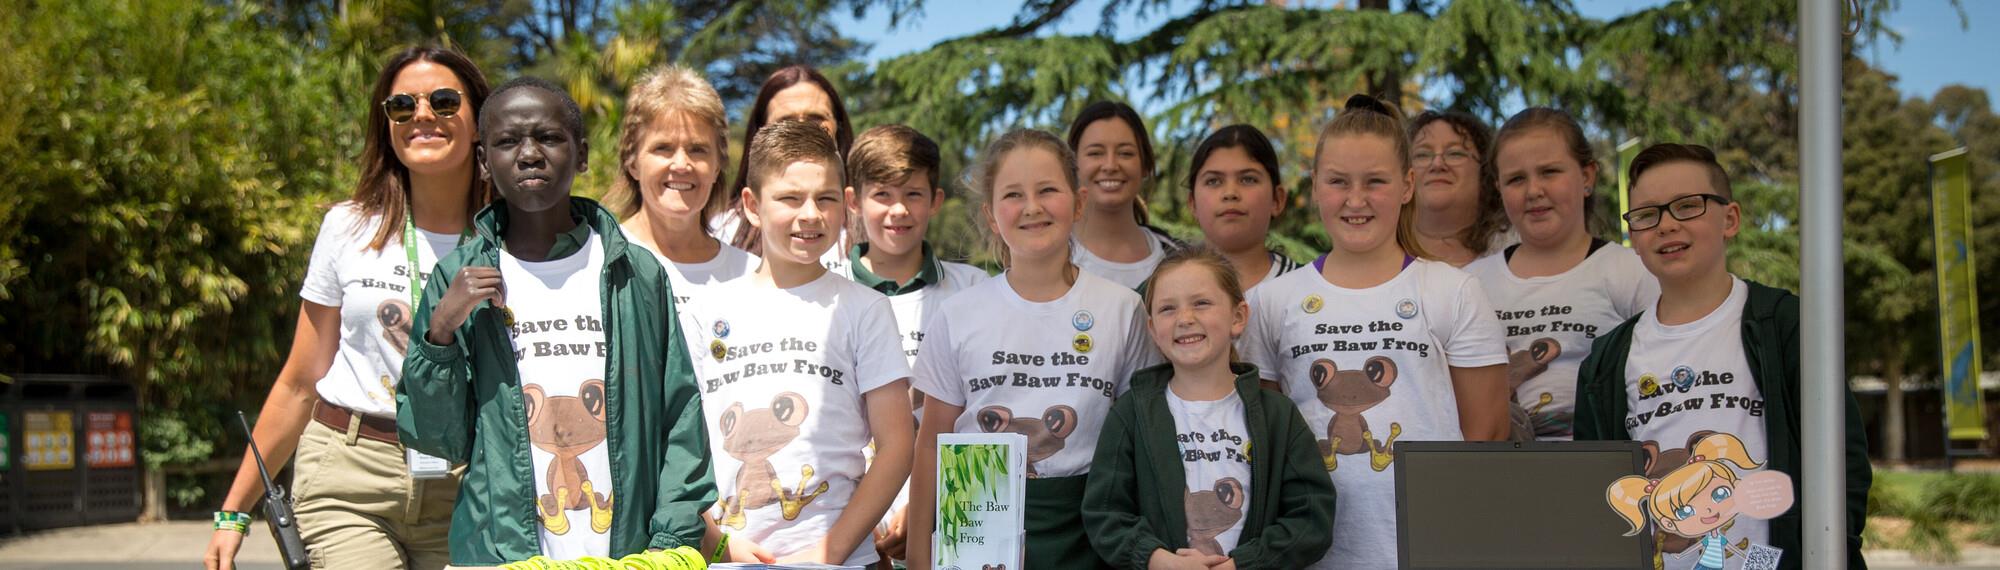 Ten students and four teachers, posing for their winning entry for the Fighting Extinction School Showcase, all wearing shirts with 'Save The Baw Baw Frog.'